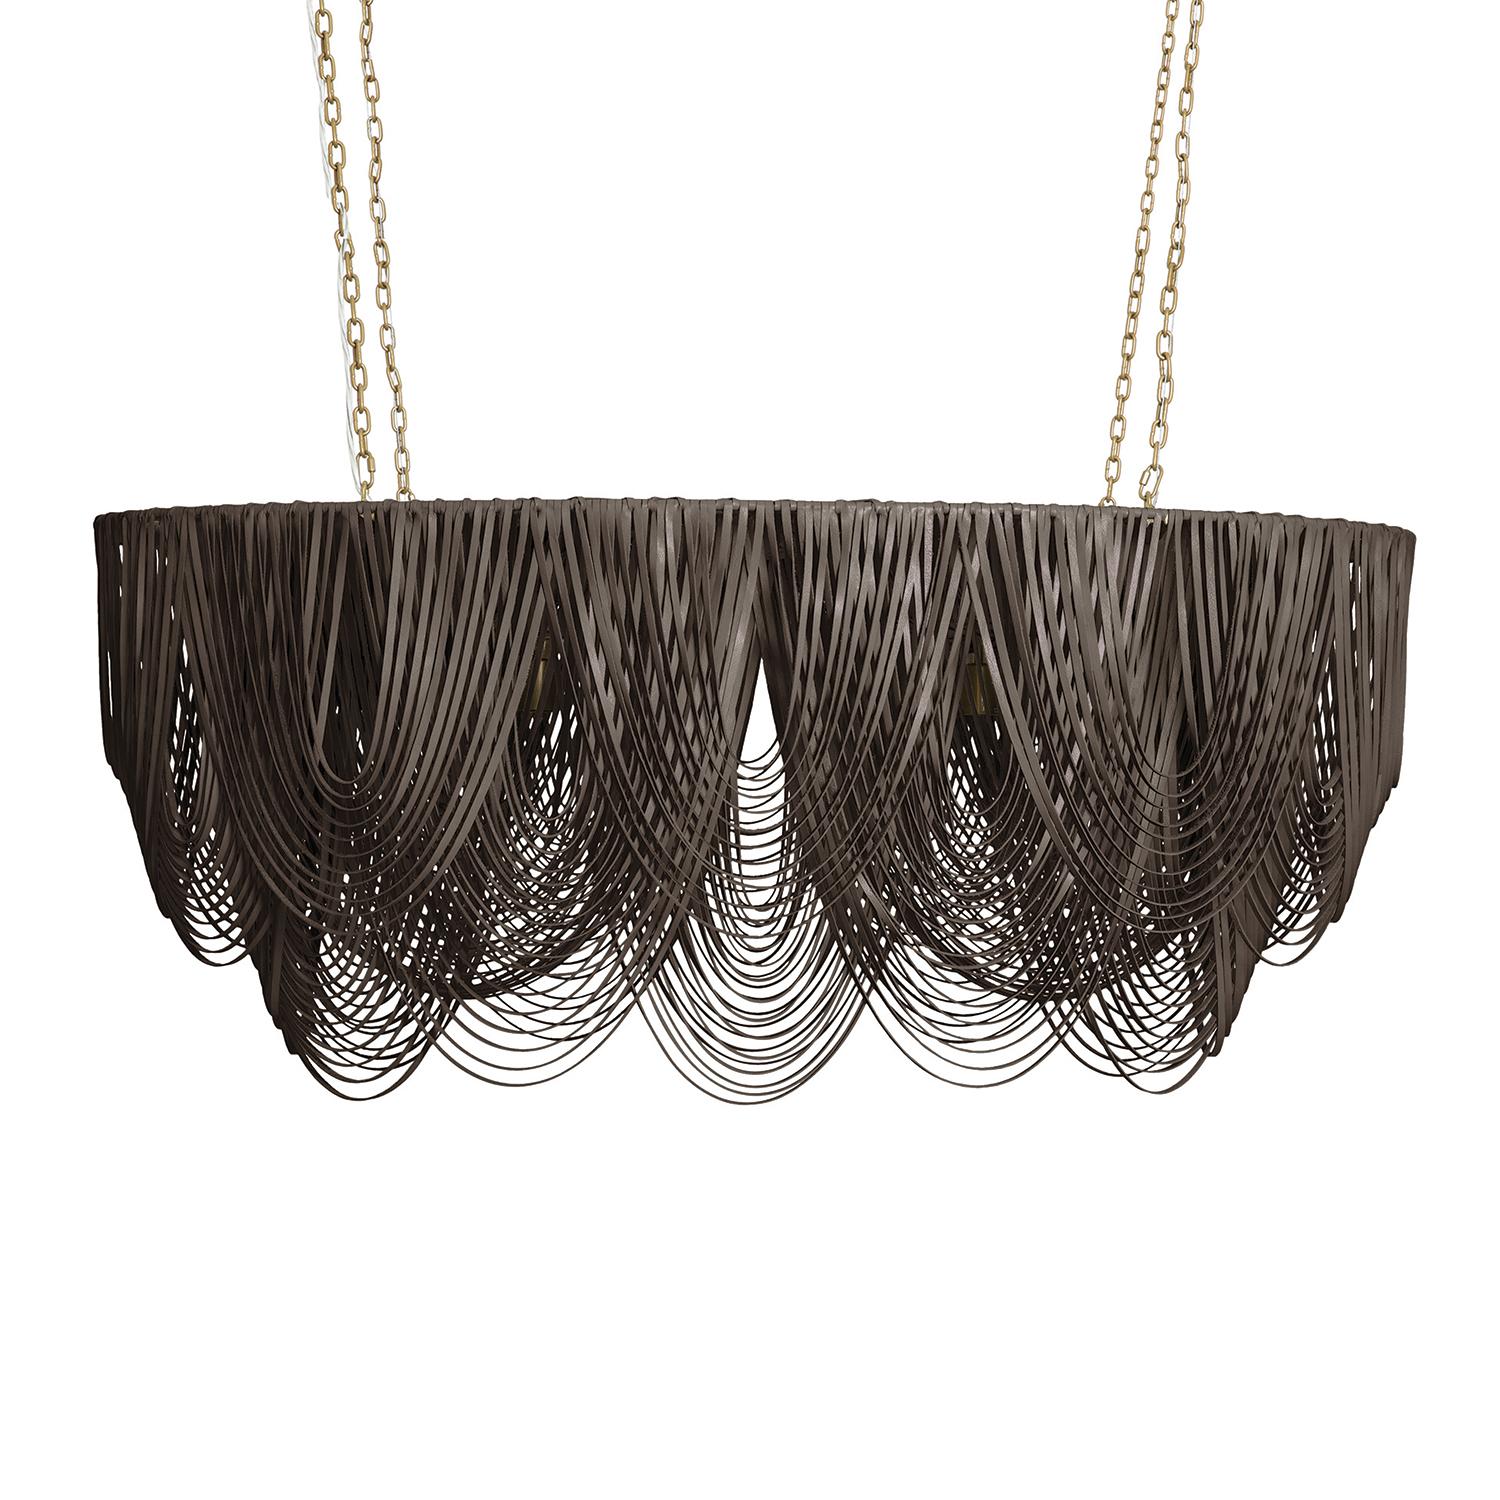 Medium Oval Whisper Leather Chandelier in Premium Leather